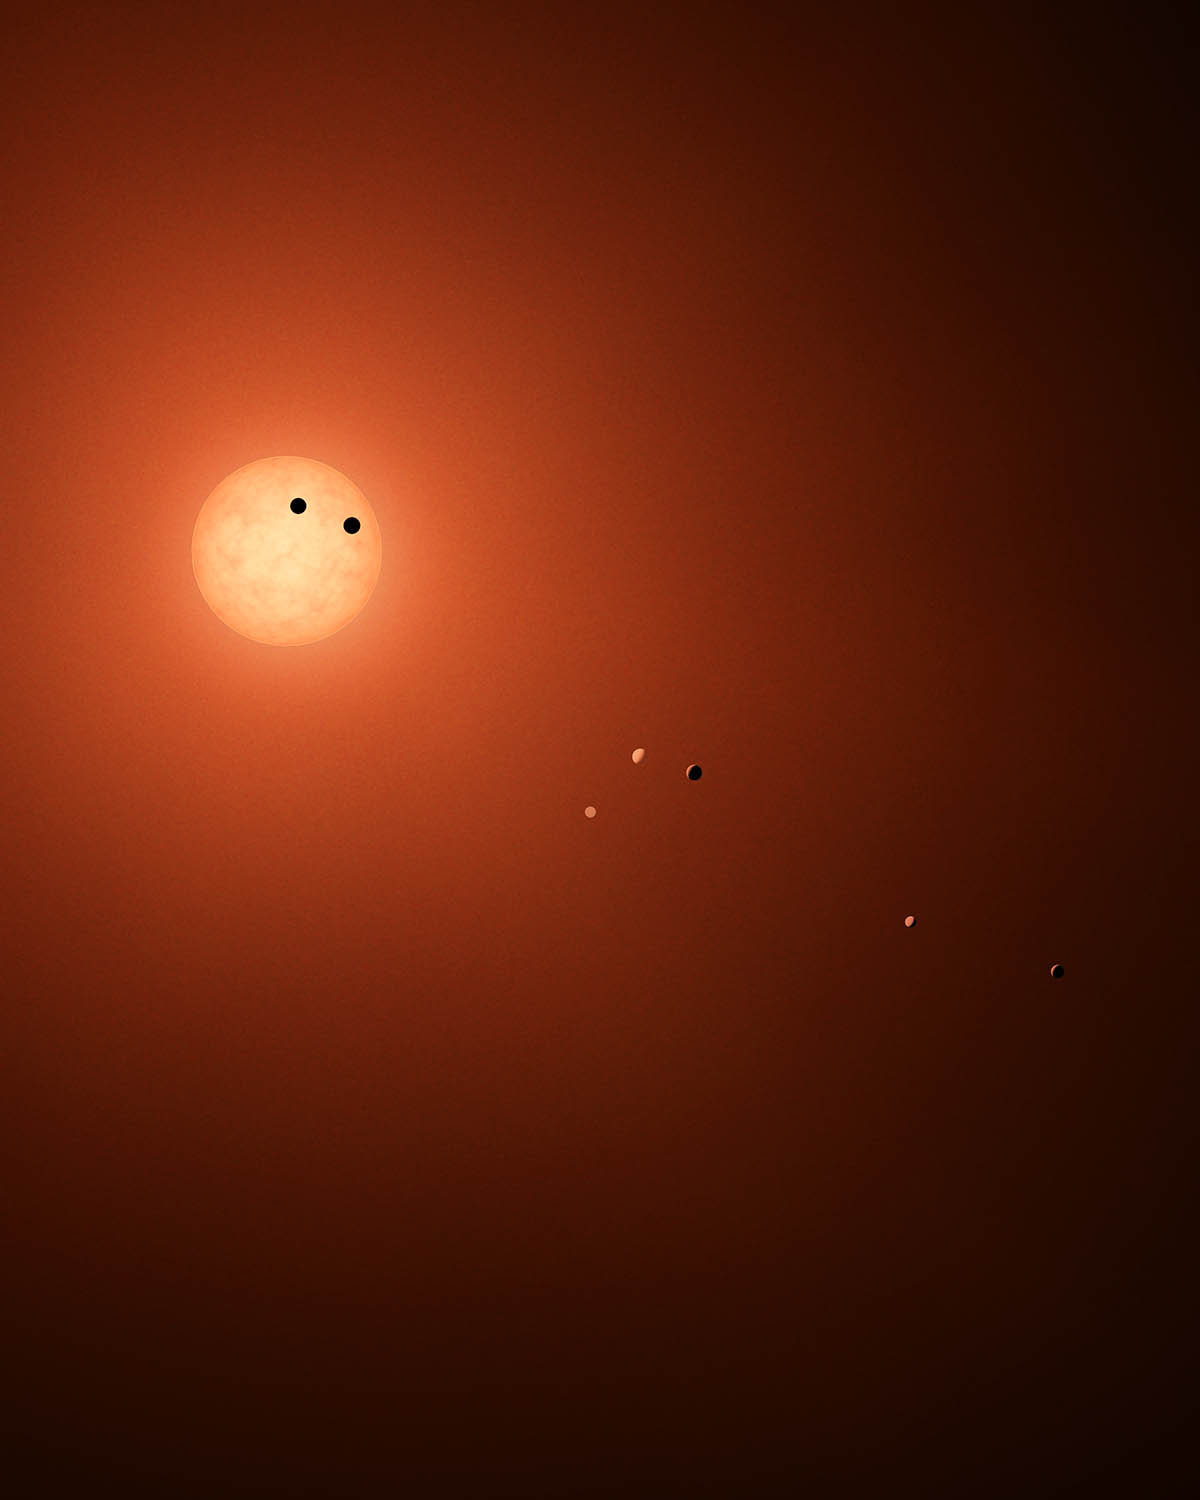 Astronomy Picture of the Day - Σελίδα 3 Ssc2017-trappist1_Med